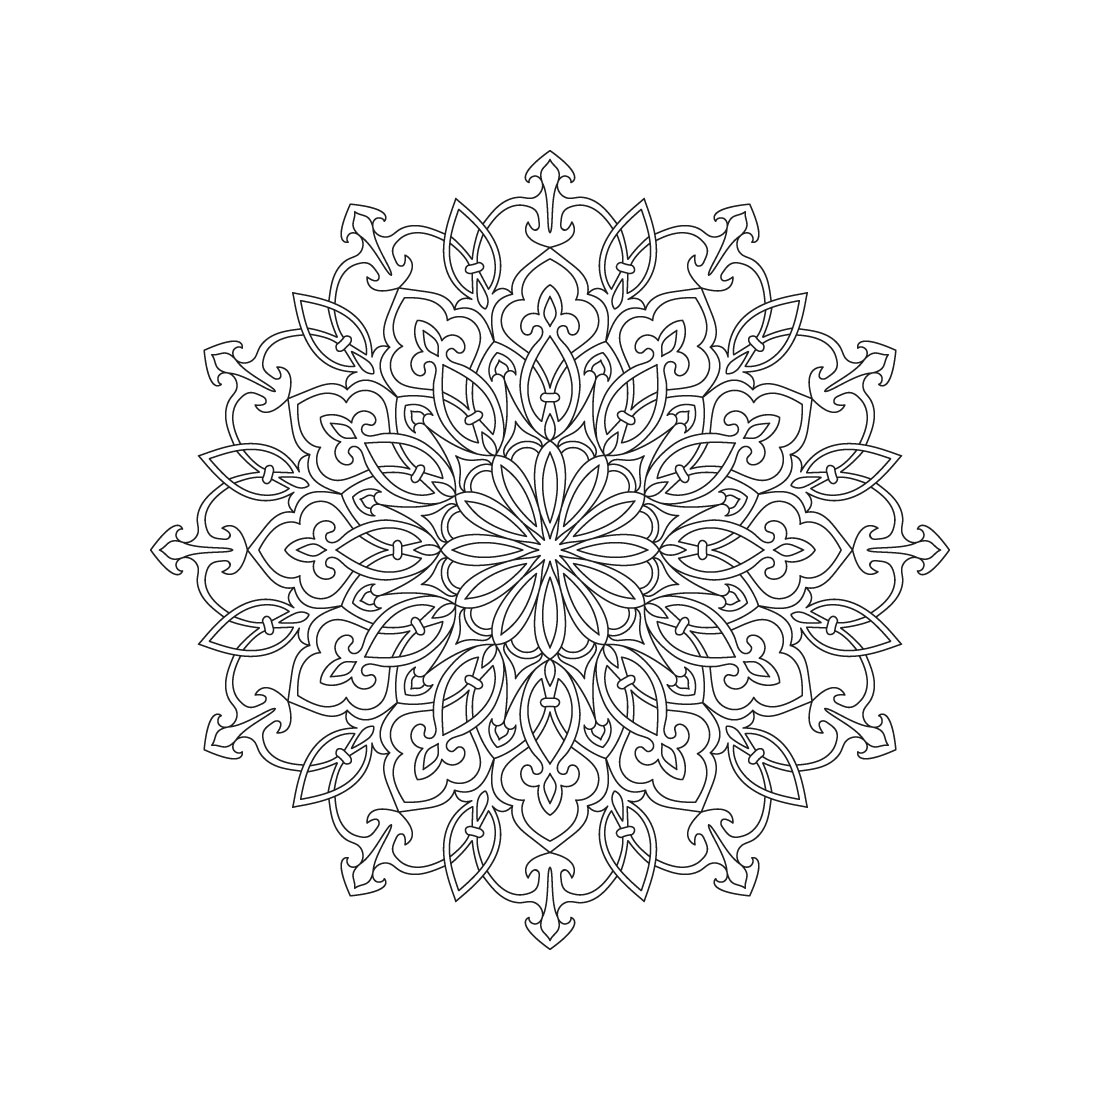 bundle of 10 harmony delight mandala coloring book pages 03 860